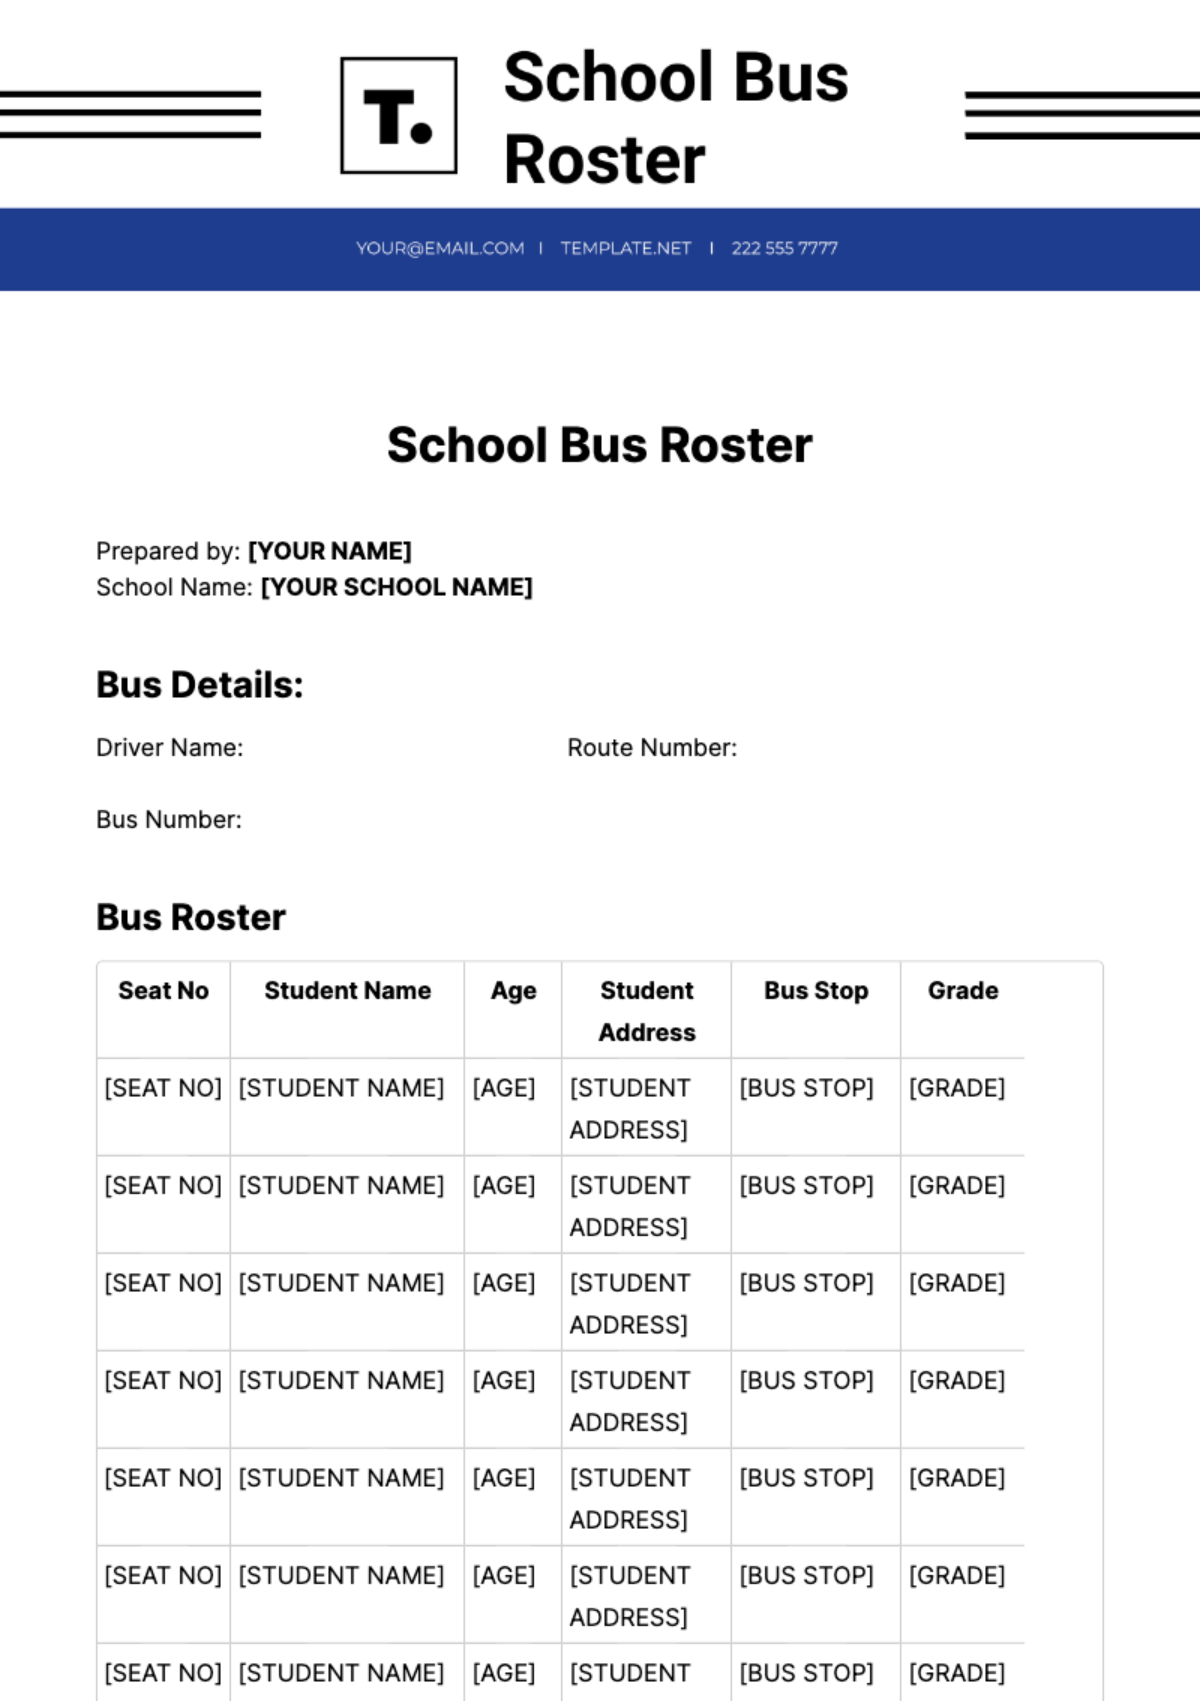 School Bus Roster Template